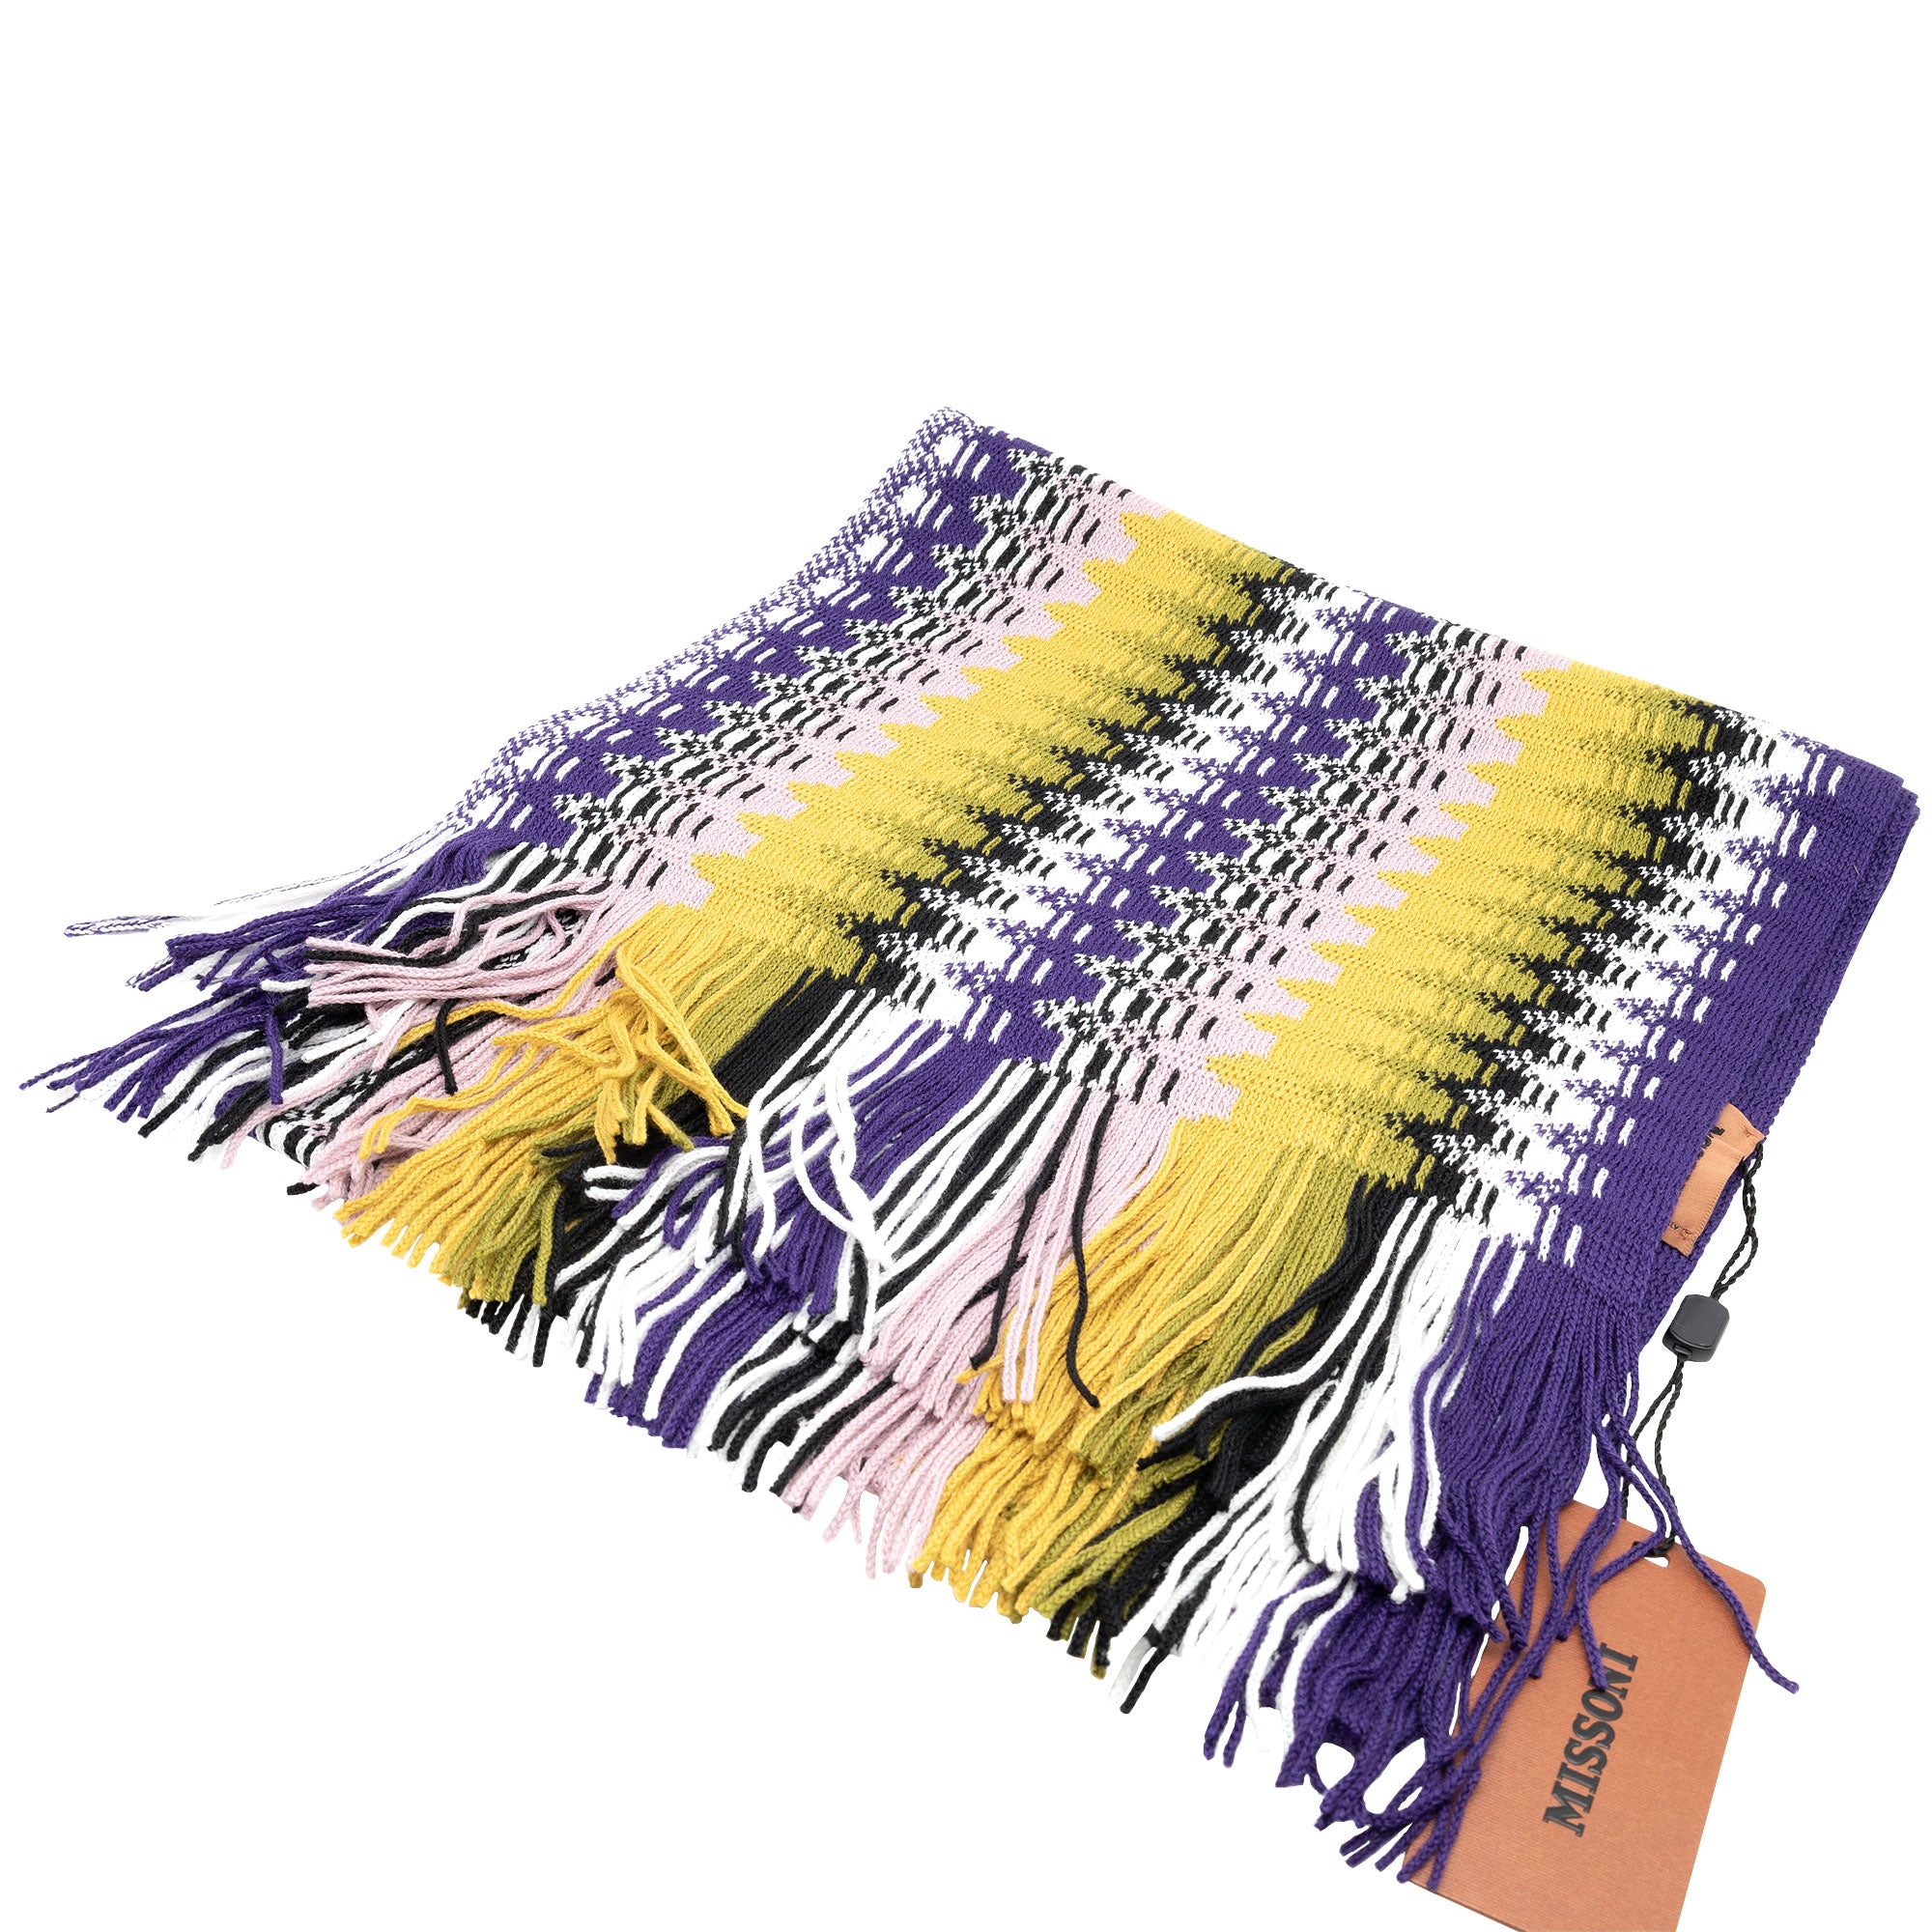 Missoni Scarf With Fringes, a Geometric Pattern, & Bright Colors